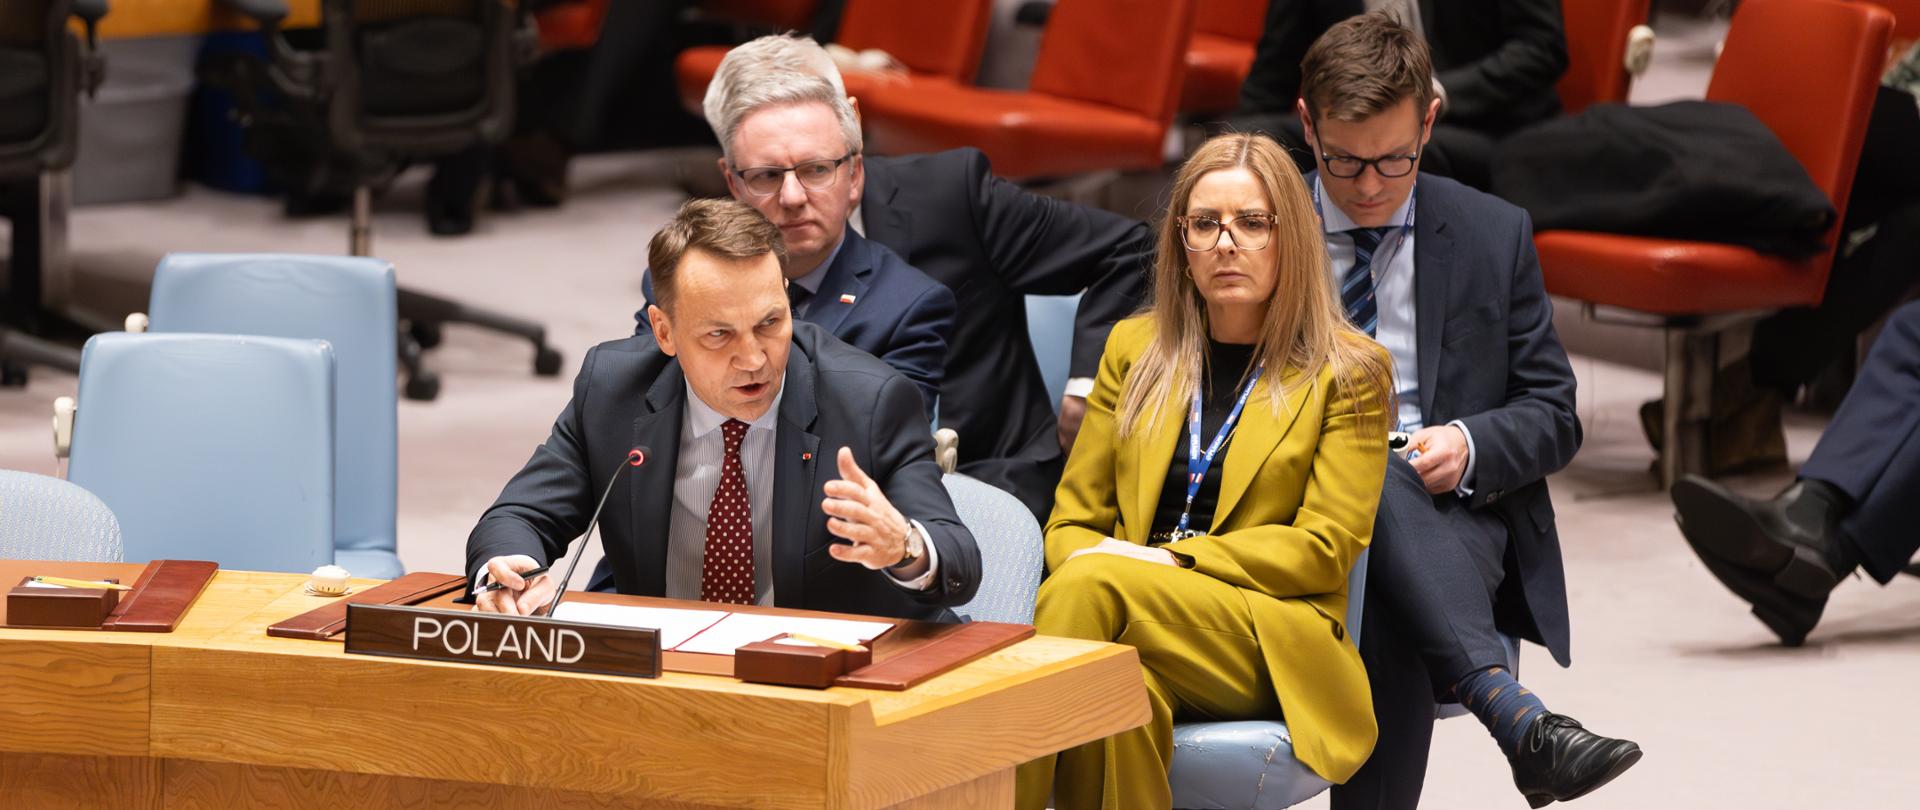 Foreign Minister Radosław Sikorski deliveres speech at UN Security Council 